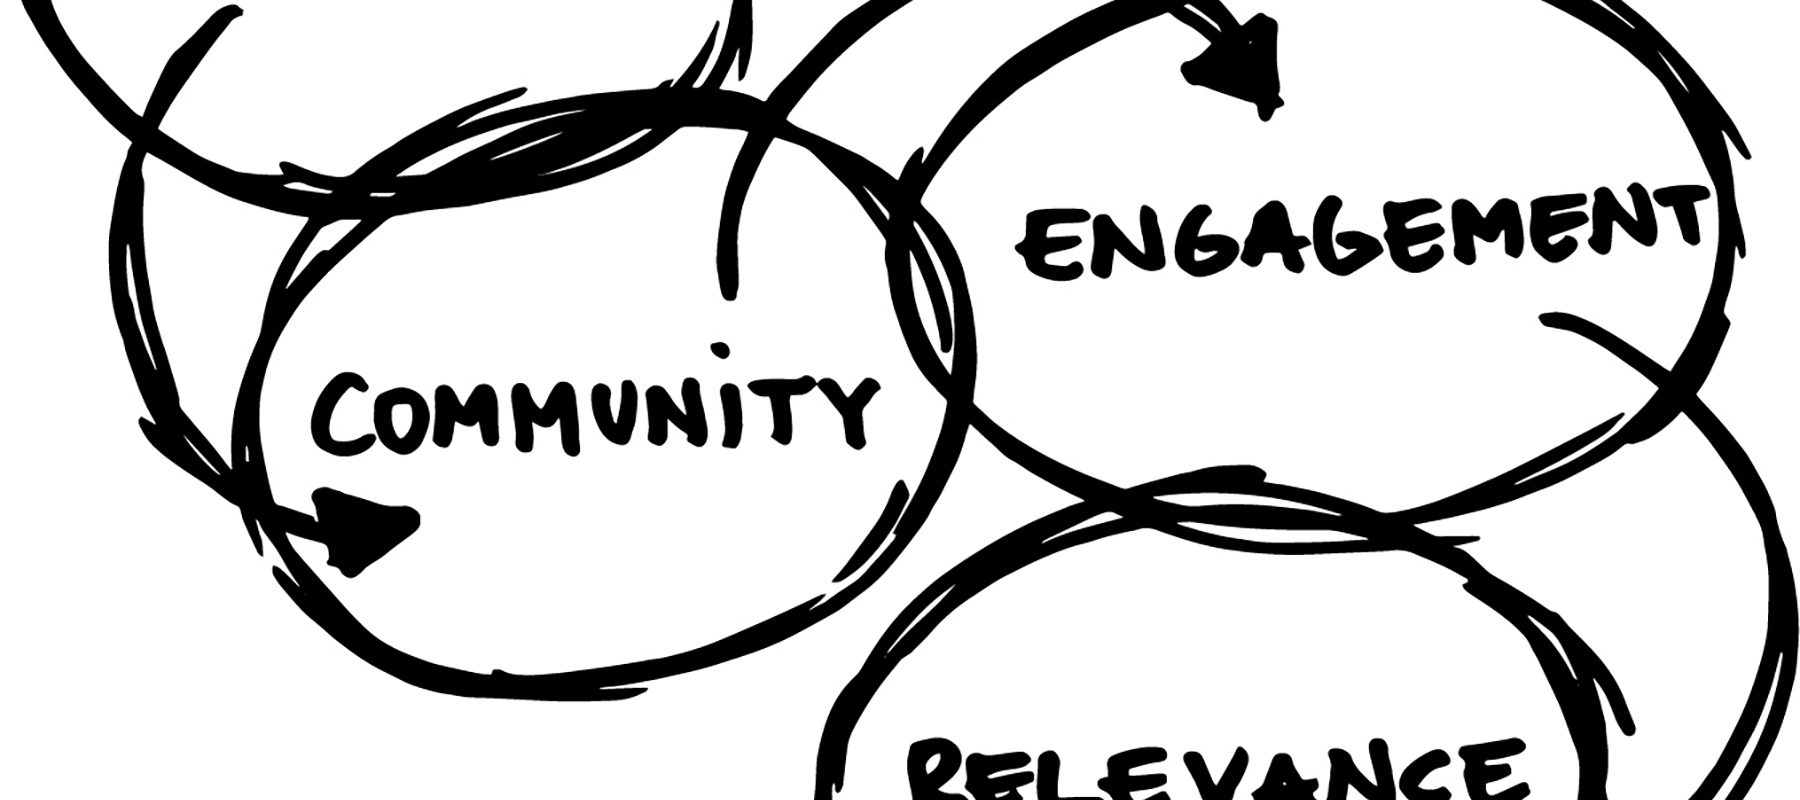 The following words appear in circles with arrows: "Creativity," "Community," "Engagement," and Revelvance."